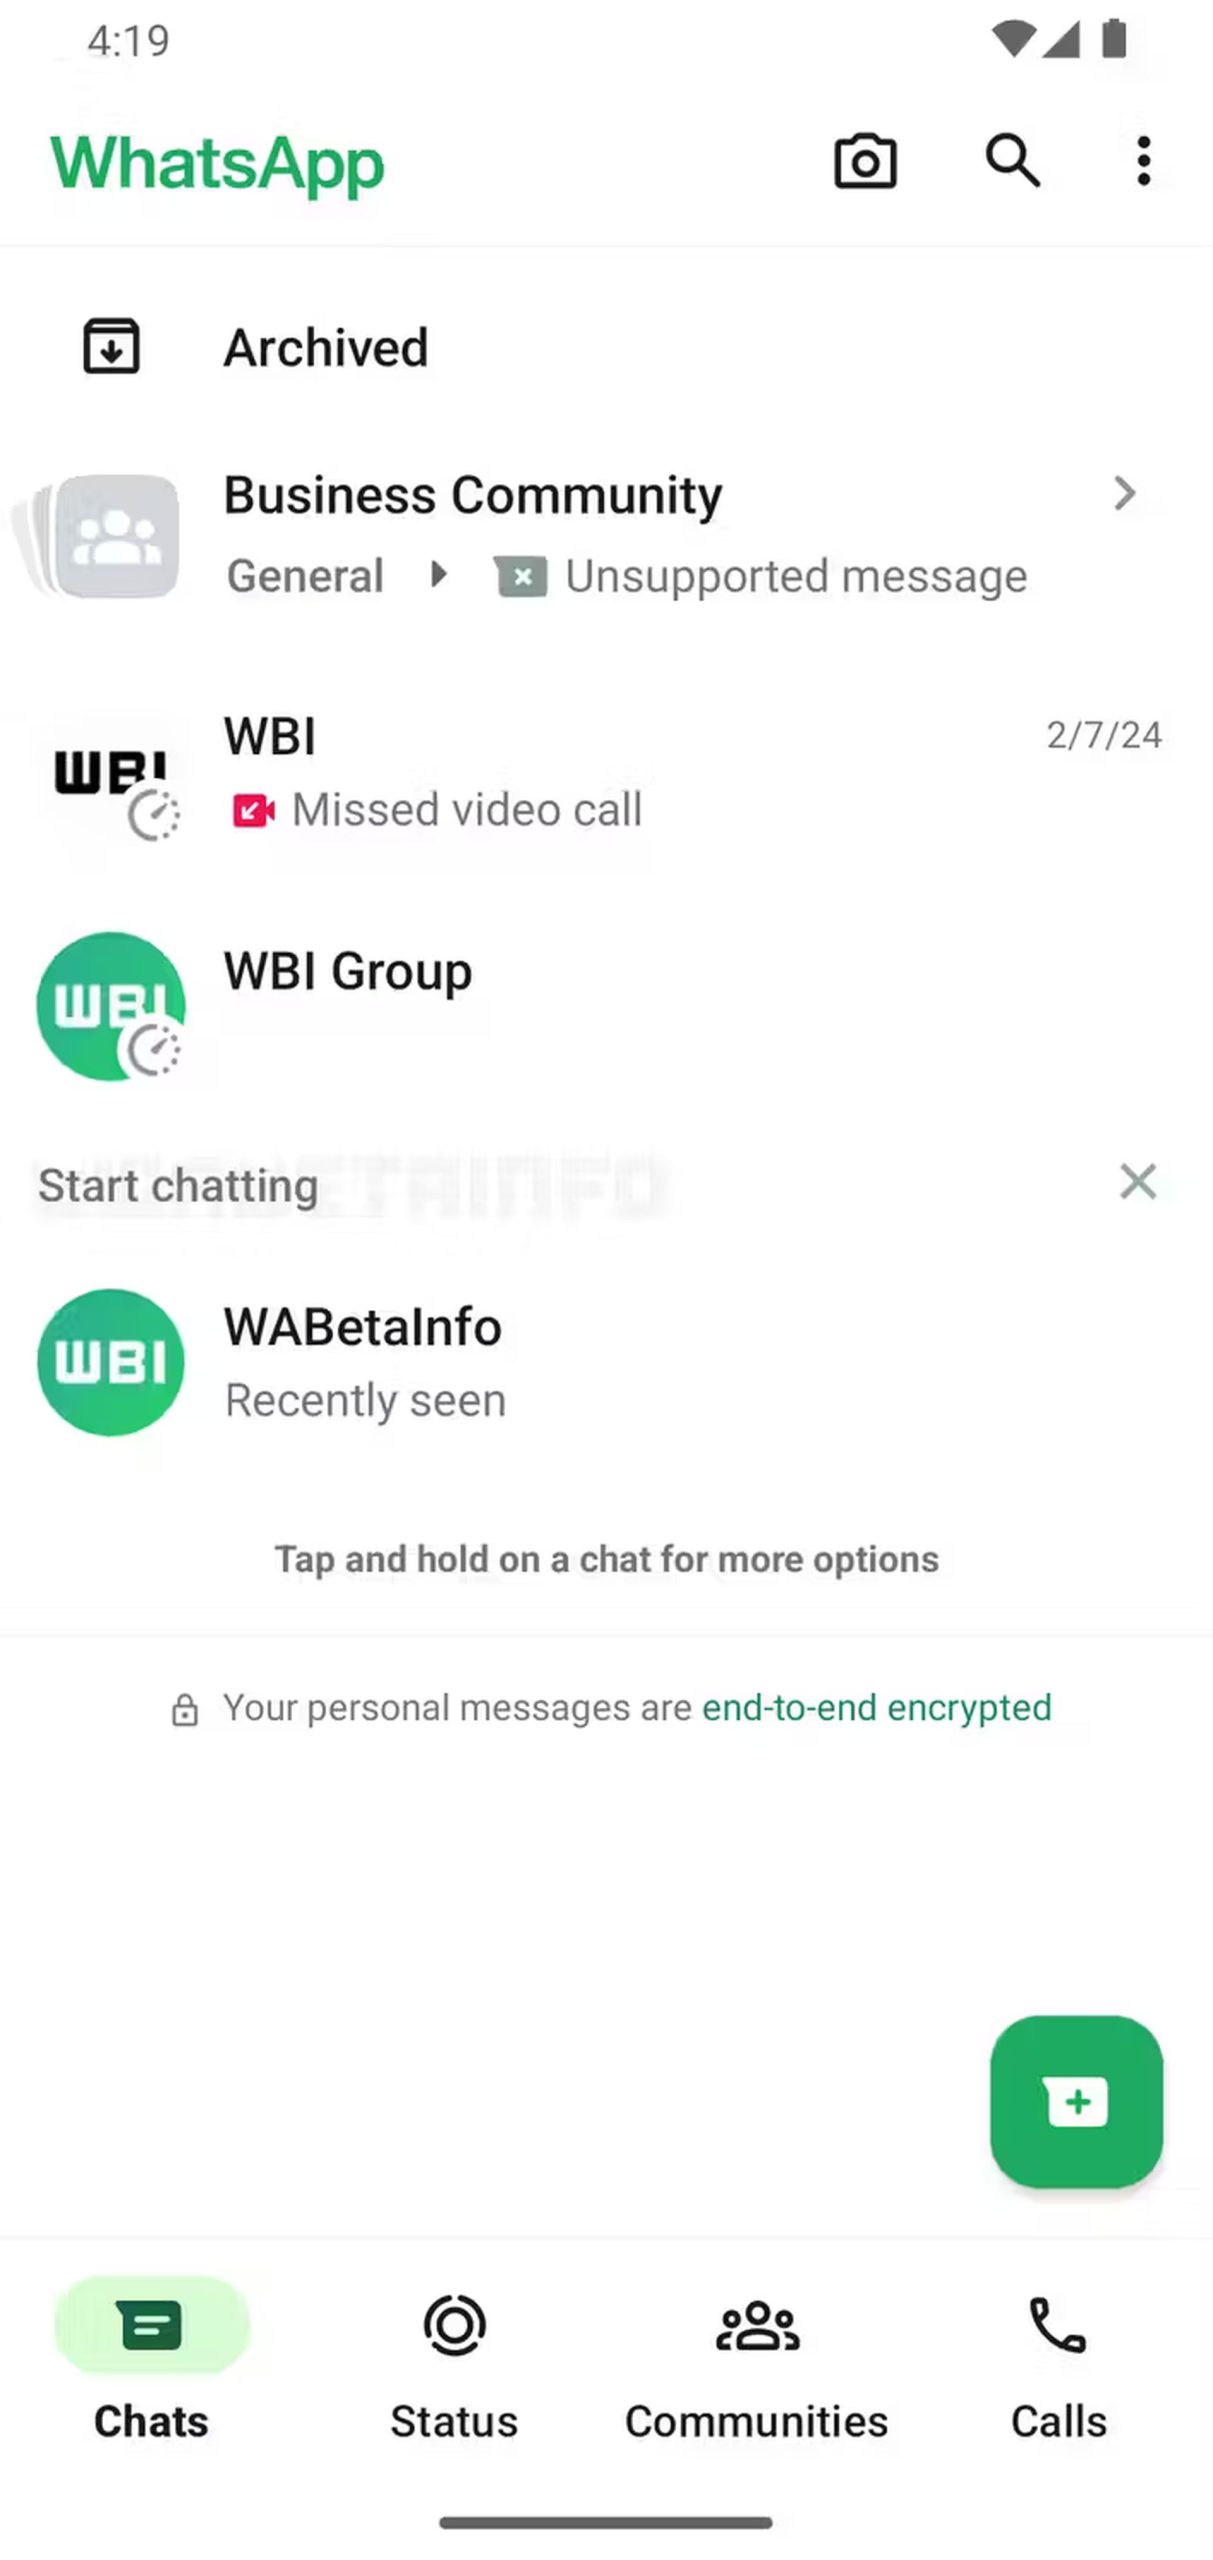 WhatsApp gets smarter with Suggested Contacts